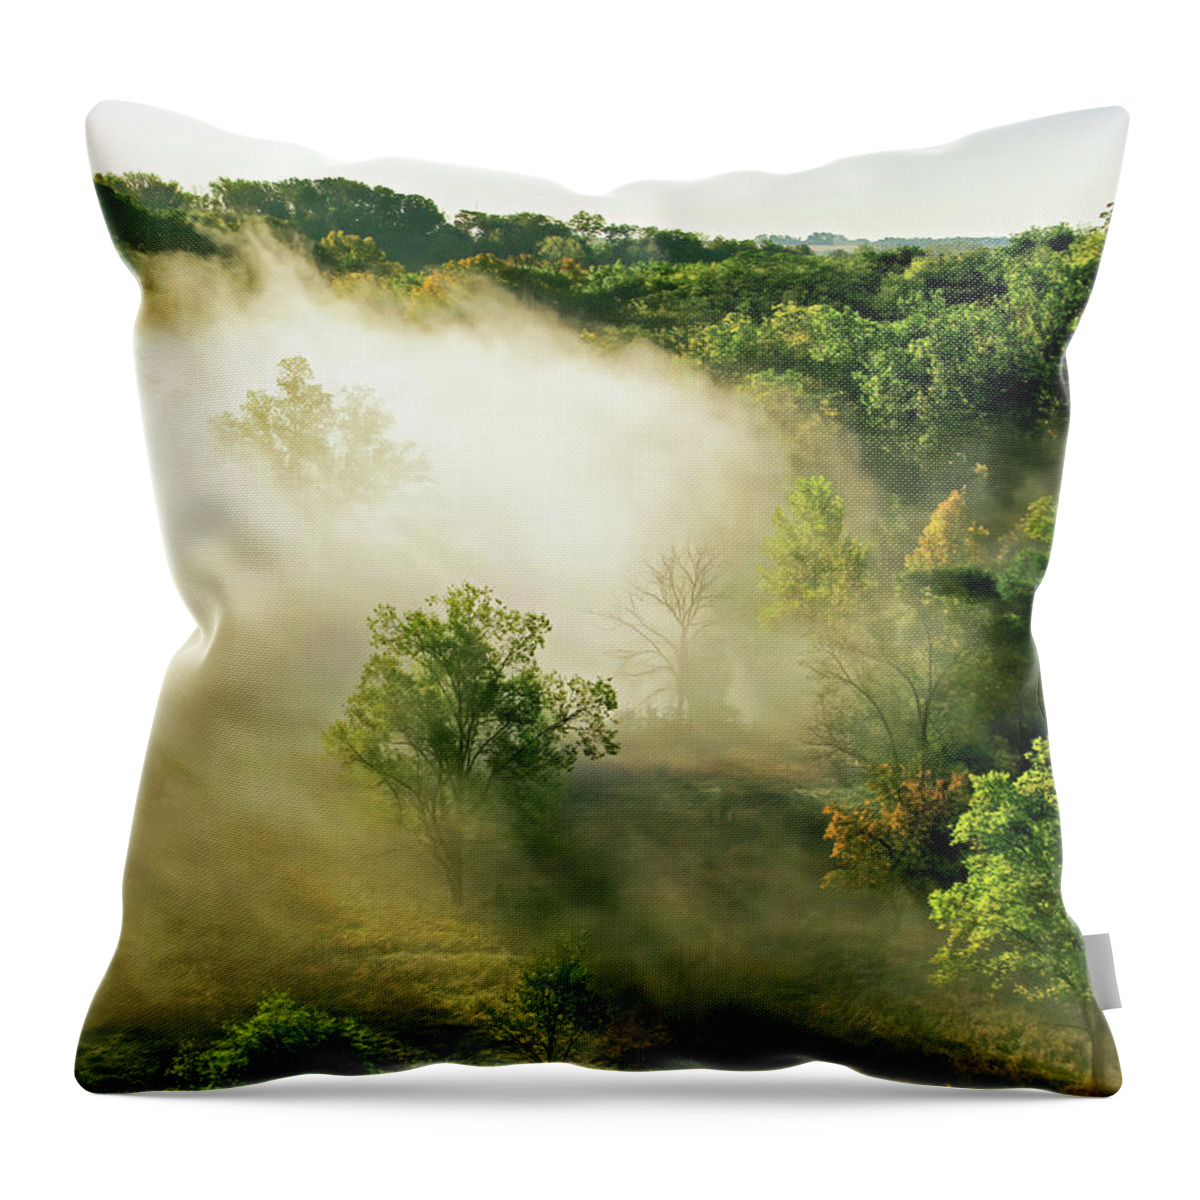 Landscape Throw Pillow featuring the photograph Foggy Morning by Lens Art Photography By Larry Trager